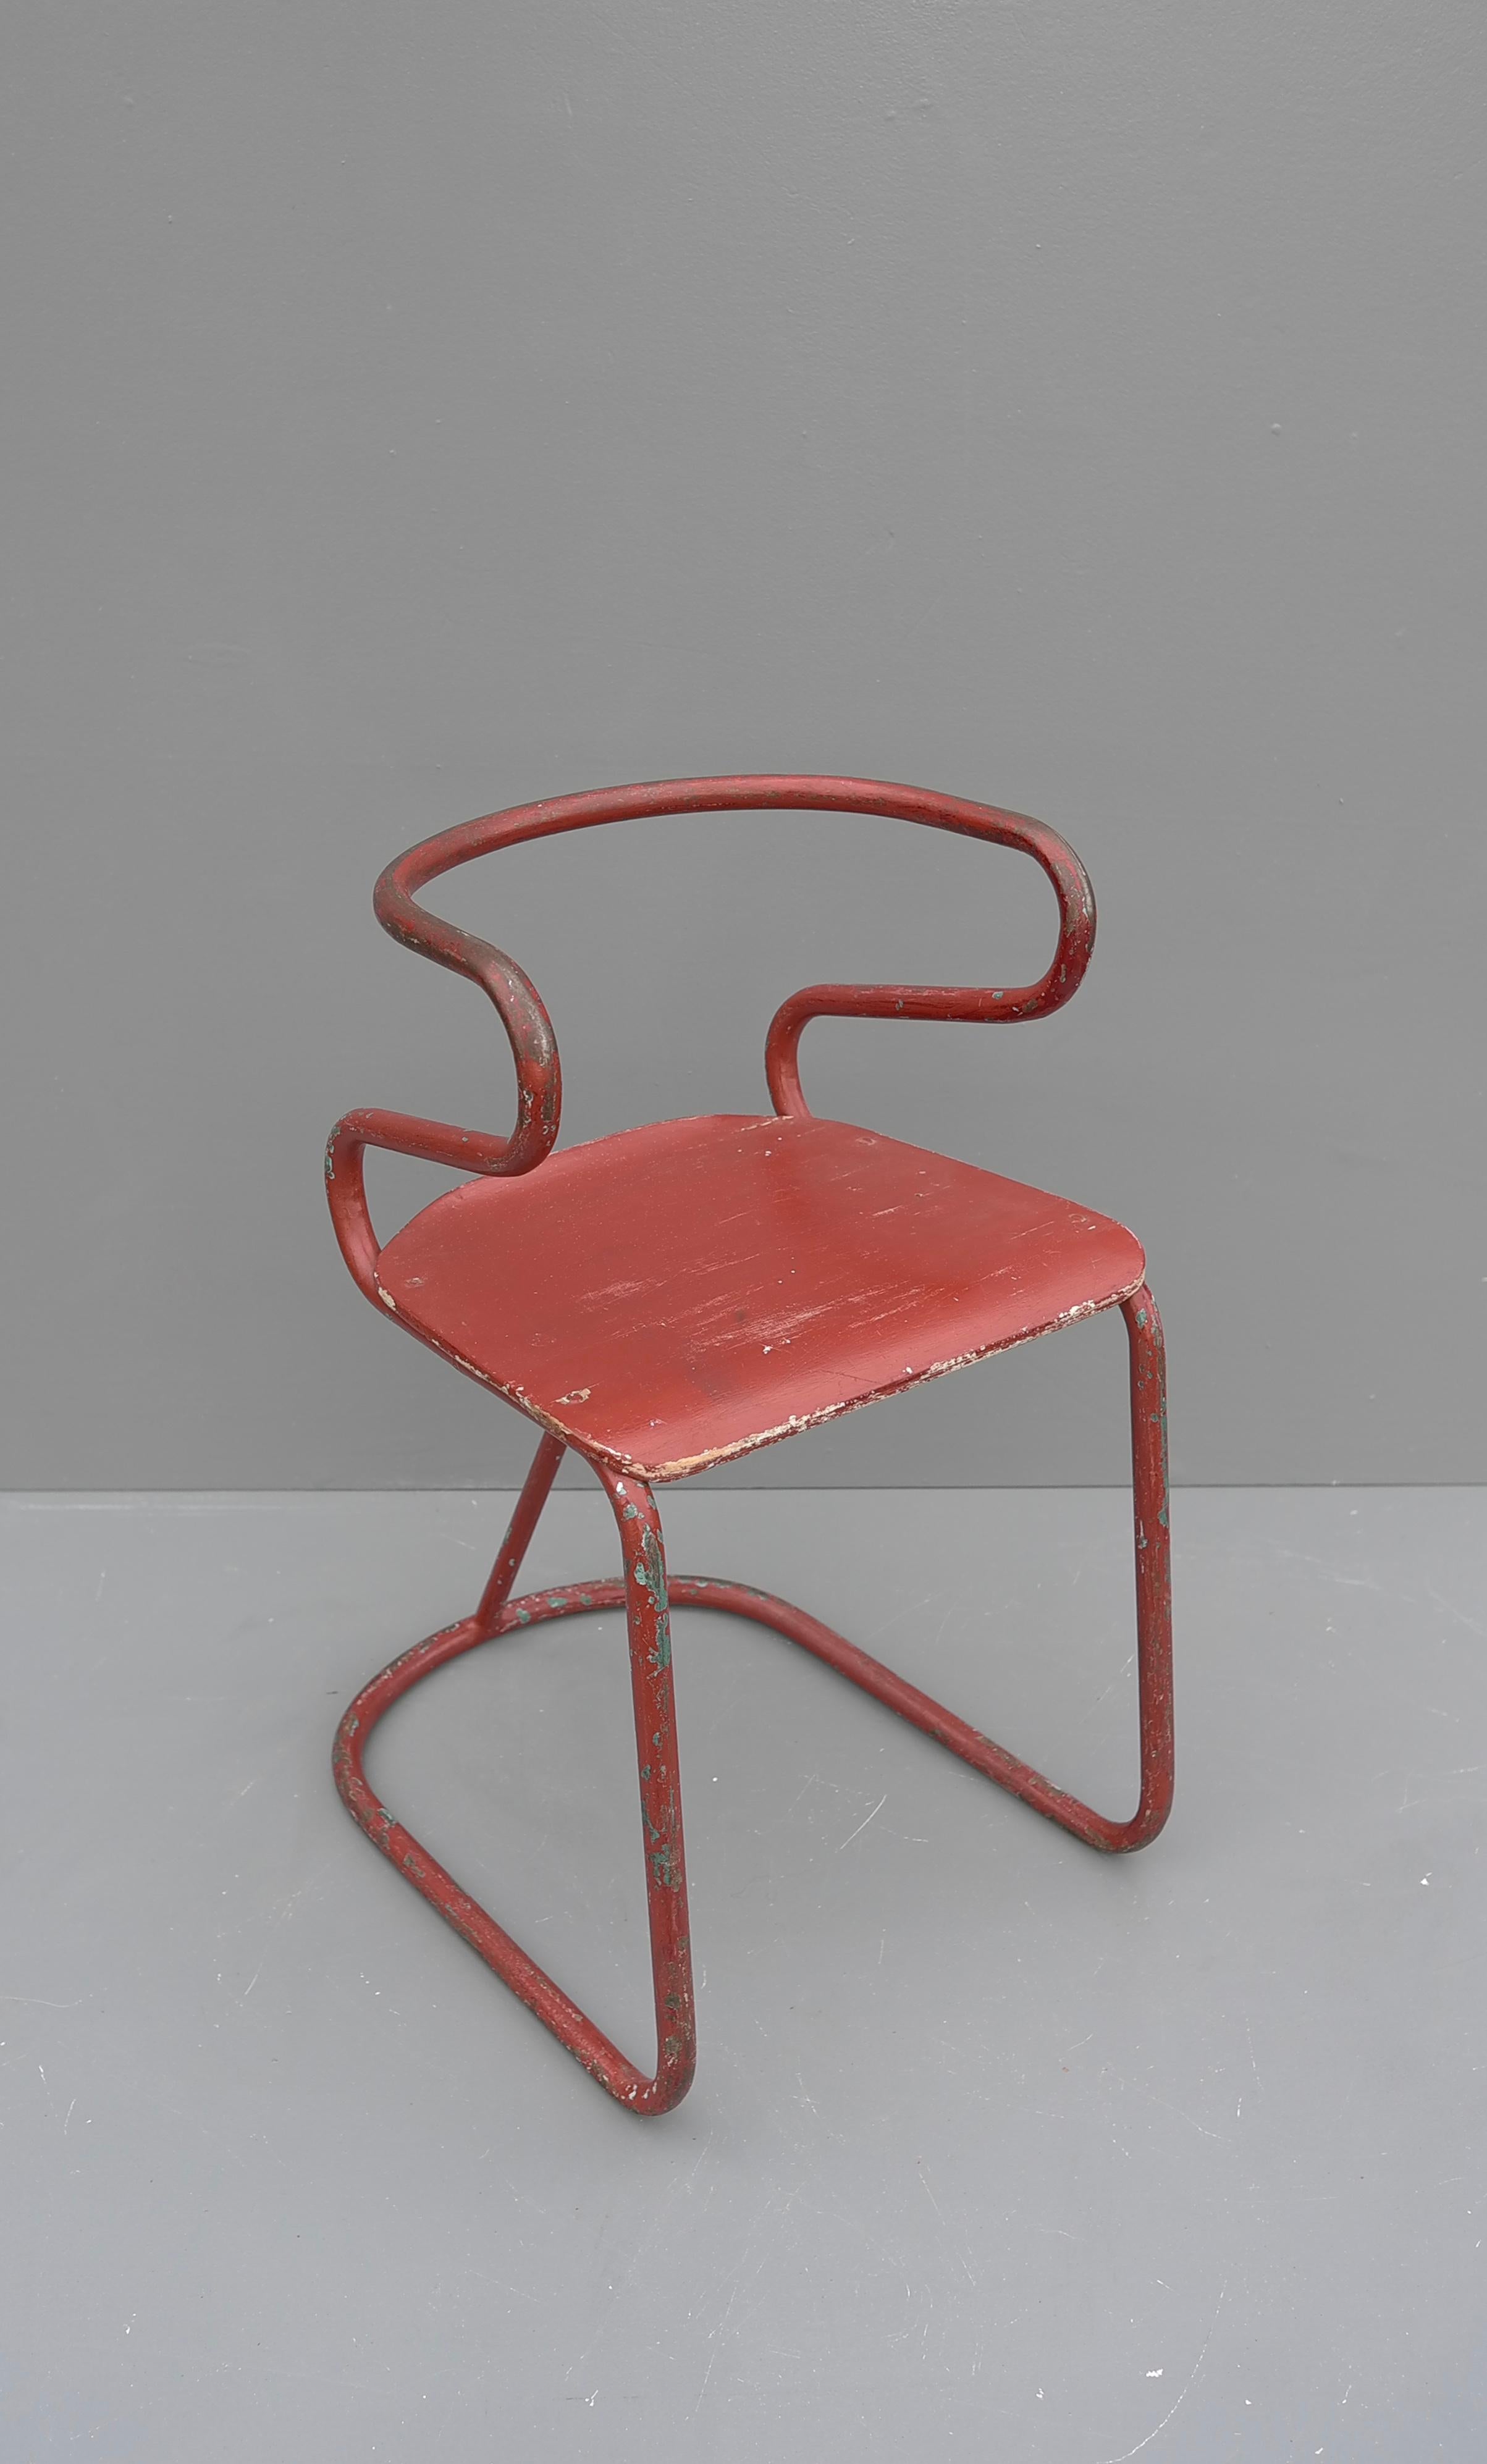 Red Sculptural Tubular Steel and Wood Mid-Century Modern Children Chair, 1950's For Sale 3